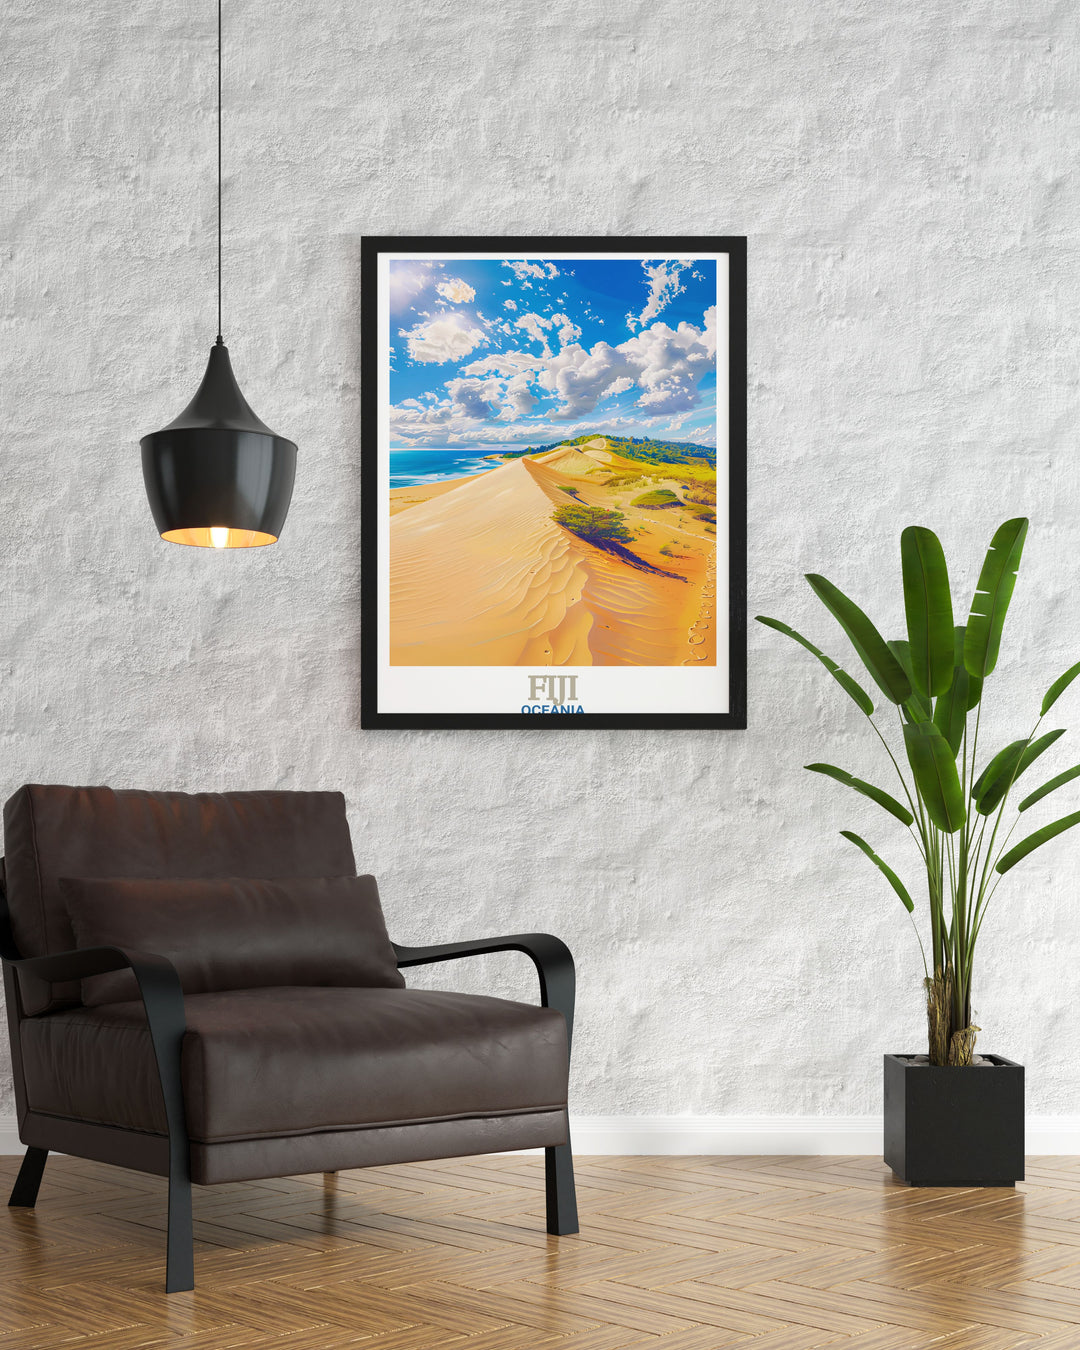 Fiji wall decor featuring a stunning depiction of Sigatoka Sand Dunes National Park ideal for those who love nature and fine art. This Sigatoka Sand Dunes National Park artwork adds a touch of tropical paradise to any room with its vibrant colors and detailed scenery.